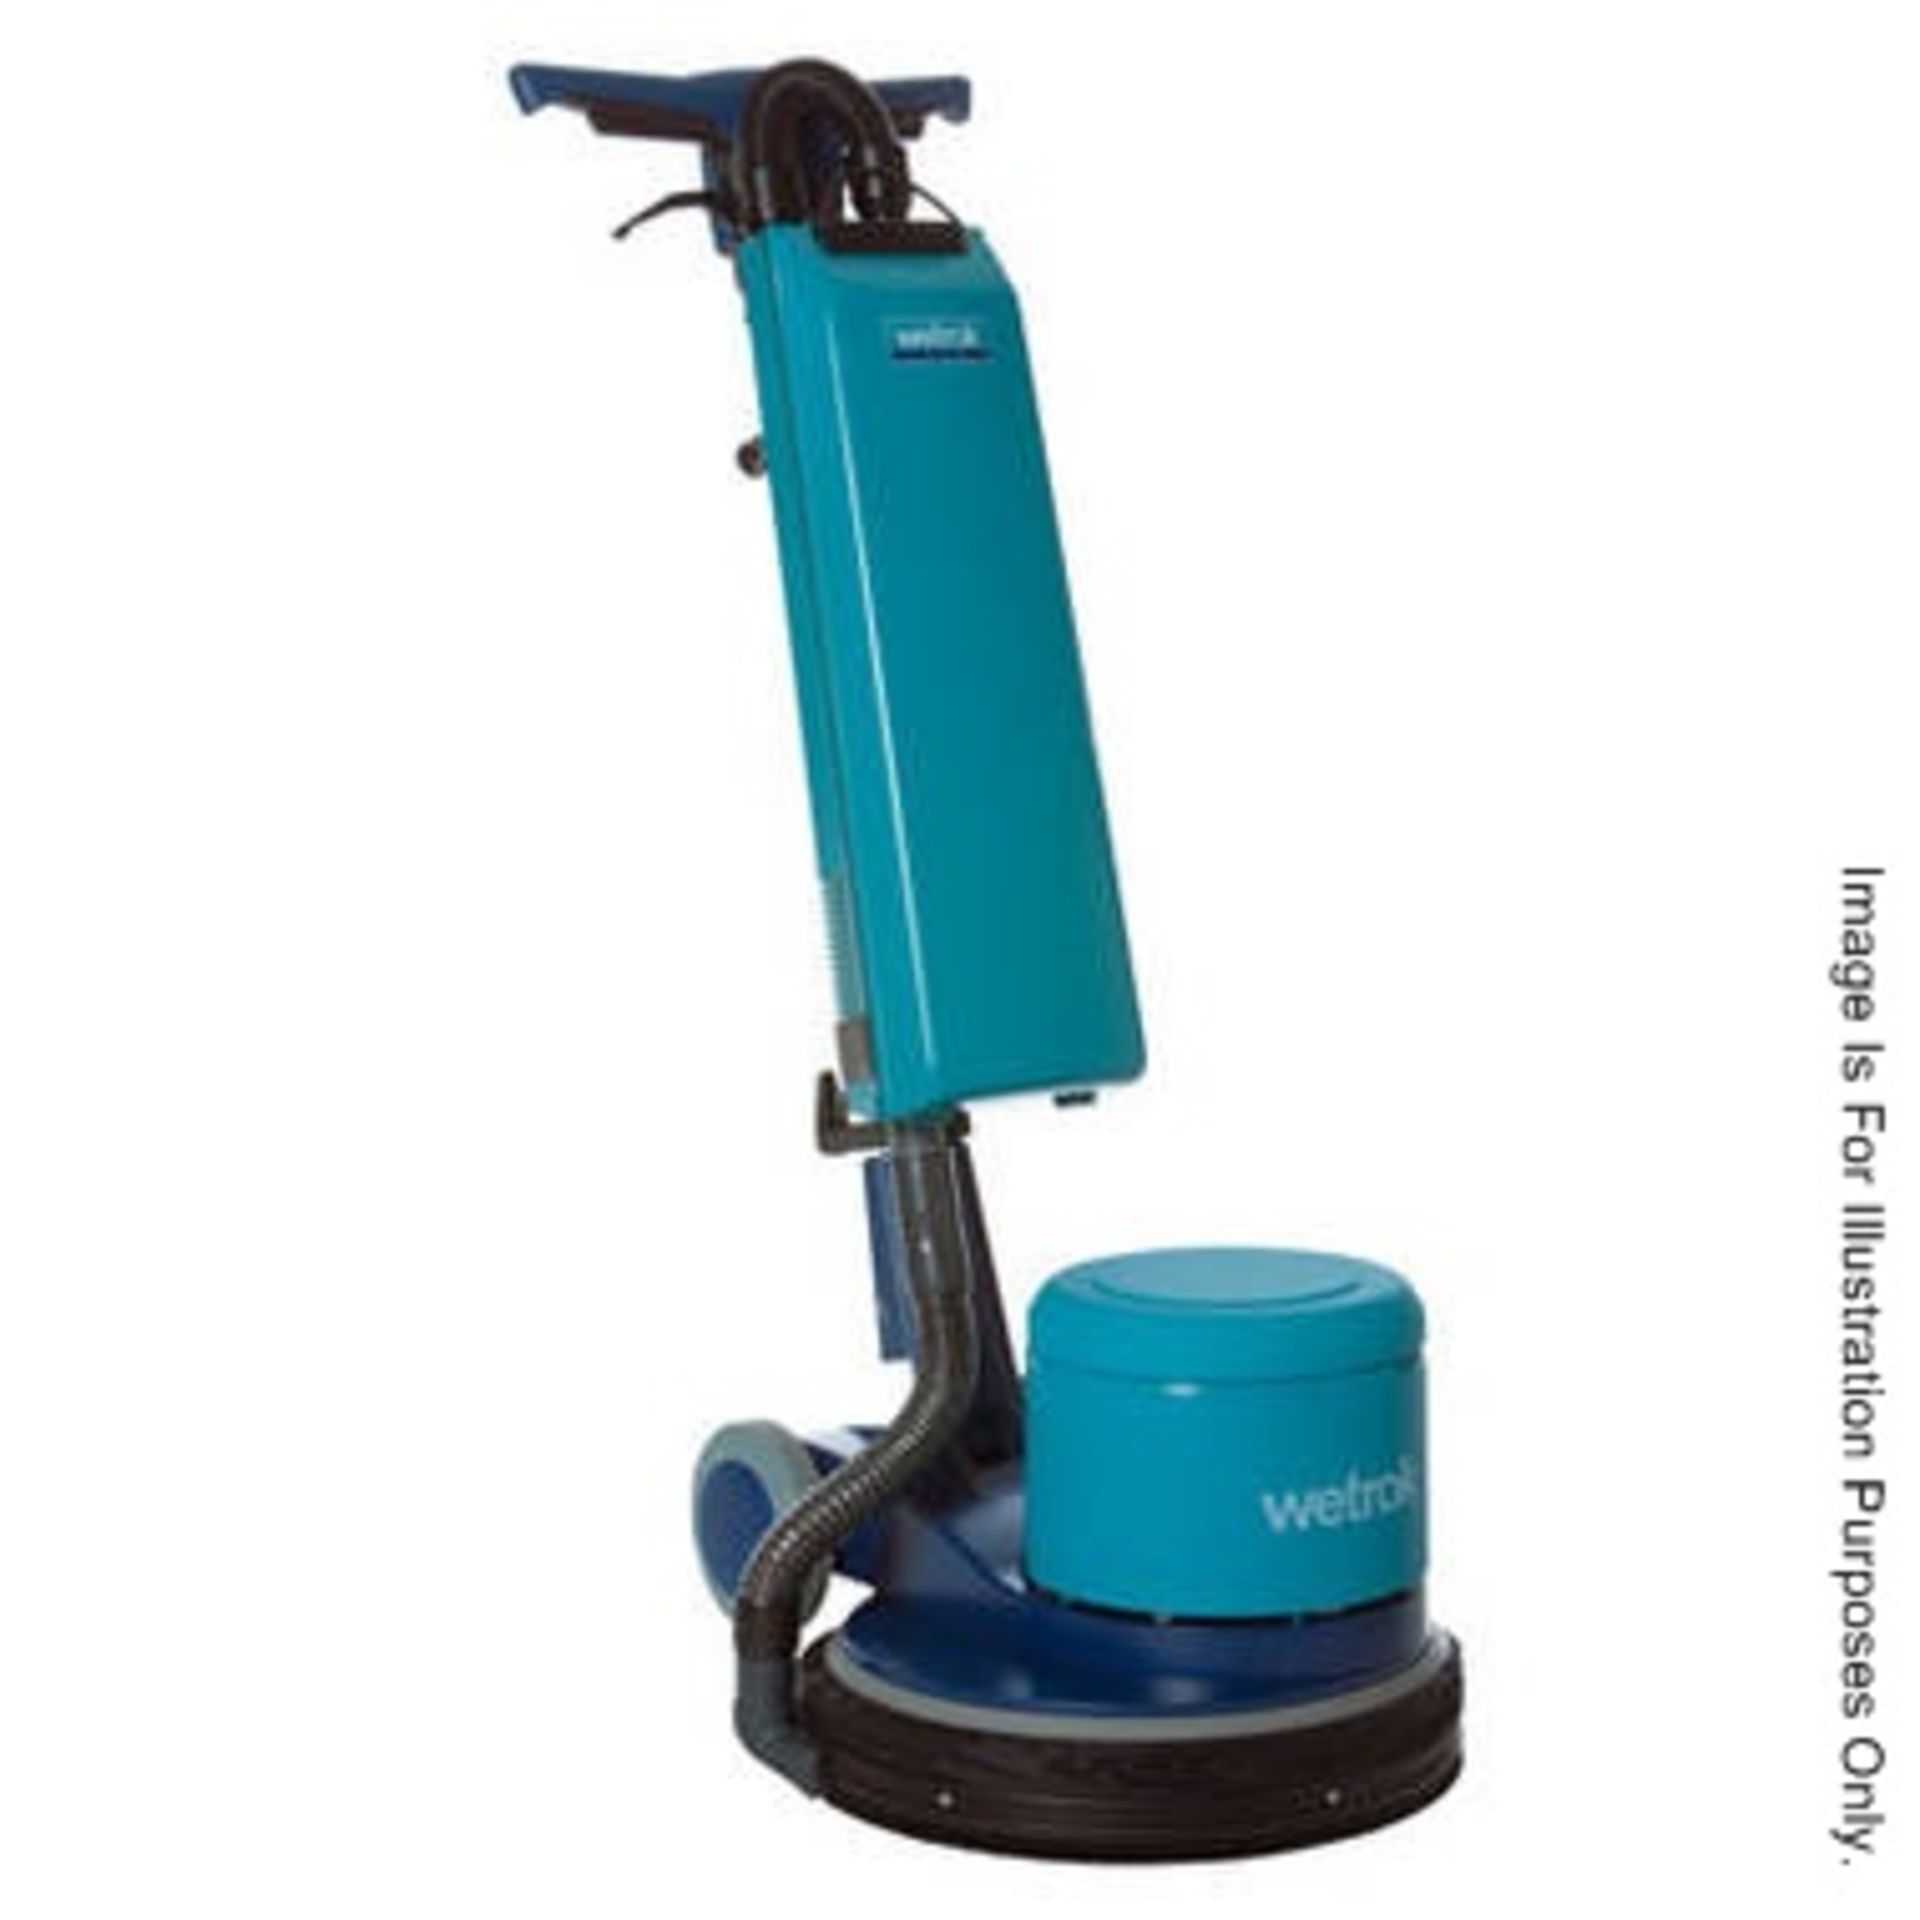 1 x WETROK Monomatic HS Commercial Spray Cleaning Machine - Suitable For Professional Cleaning